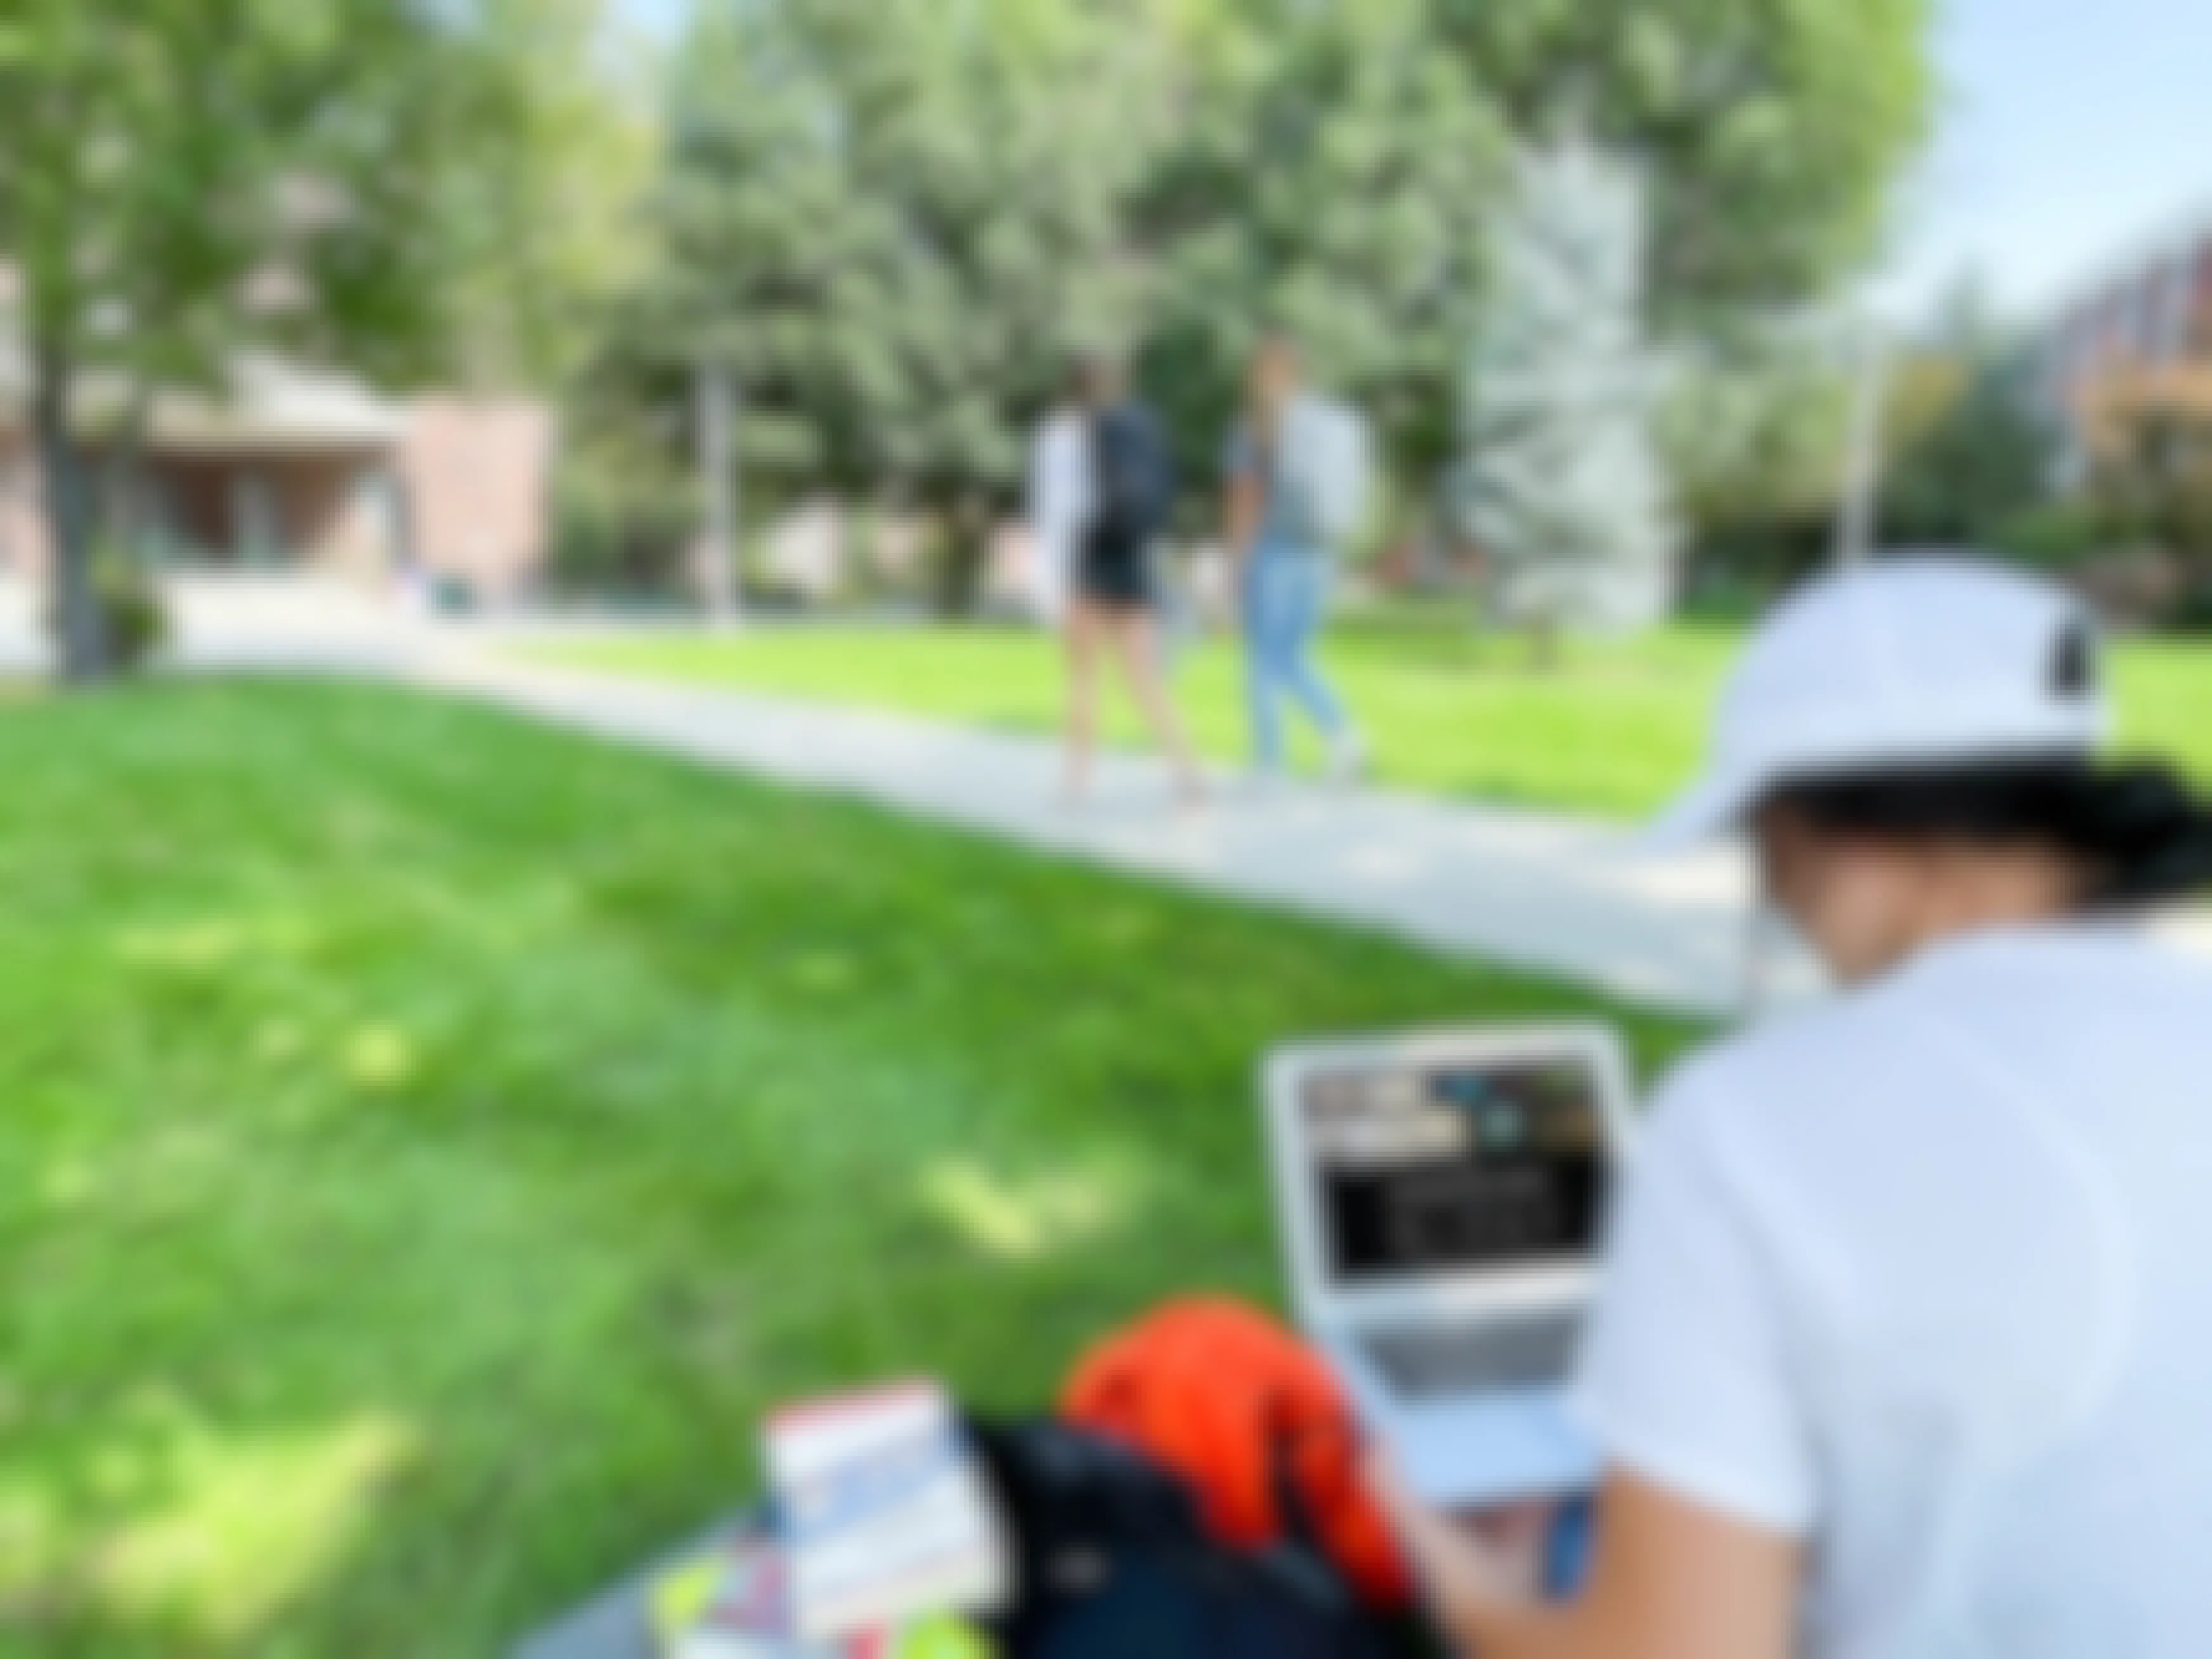 A college student sitting in grass on campus and watching Apple TV on laptop with two more students walking by on the sidewalk in the background.